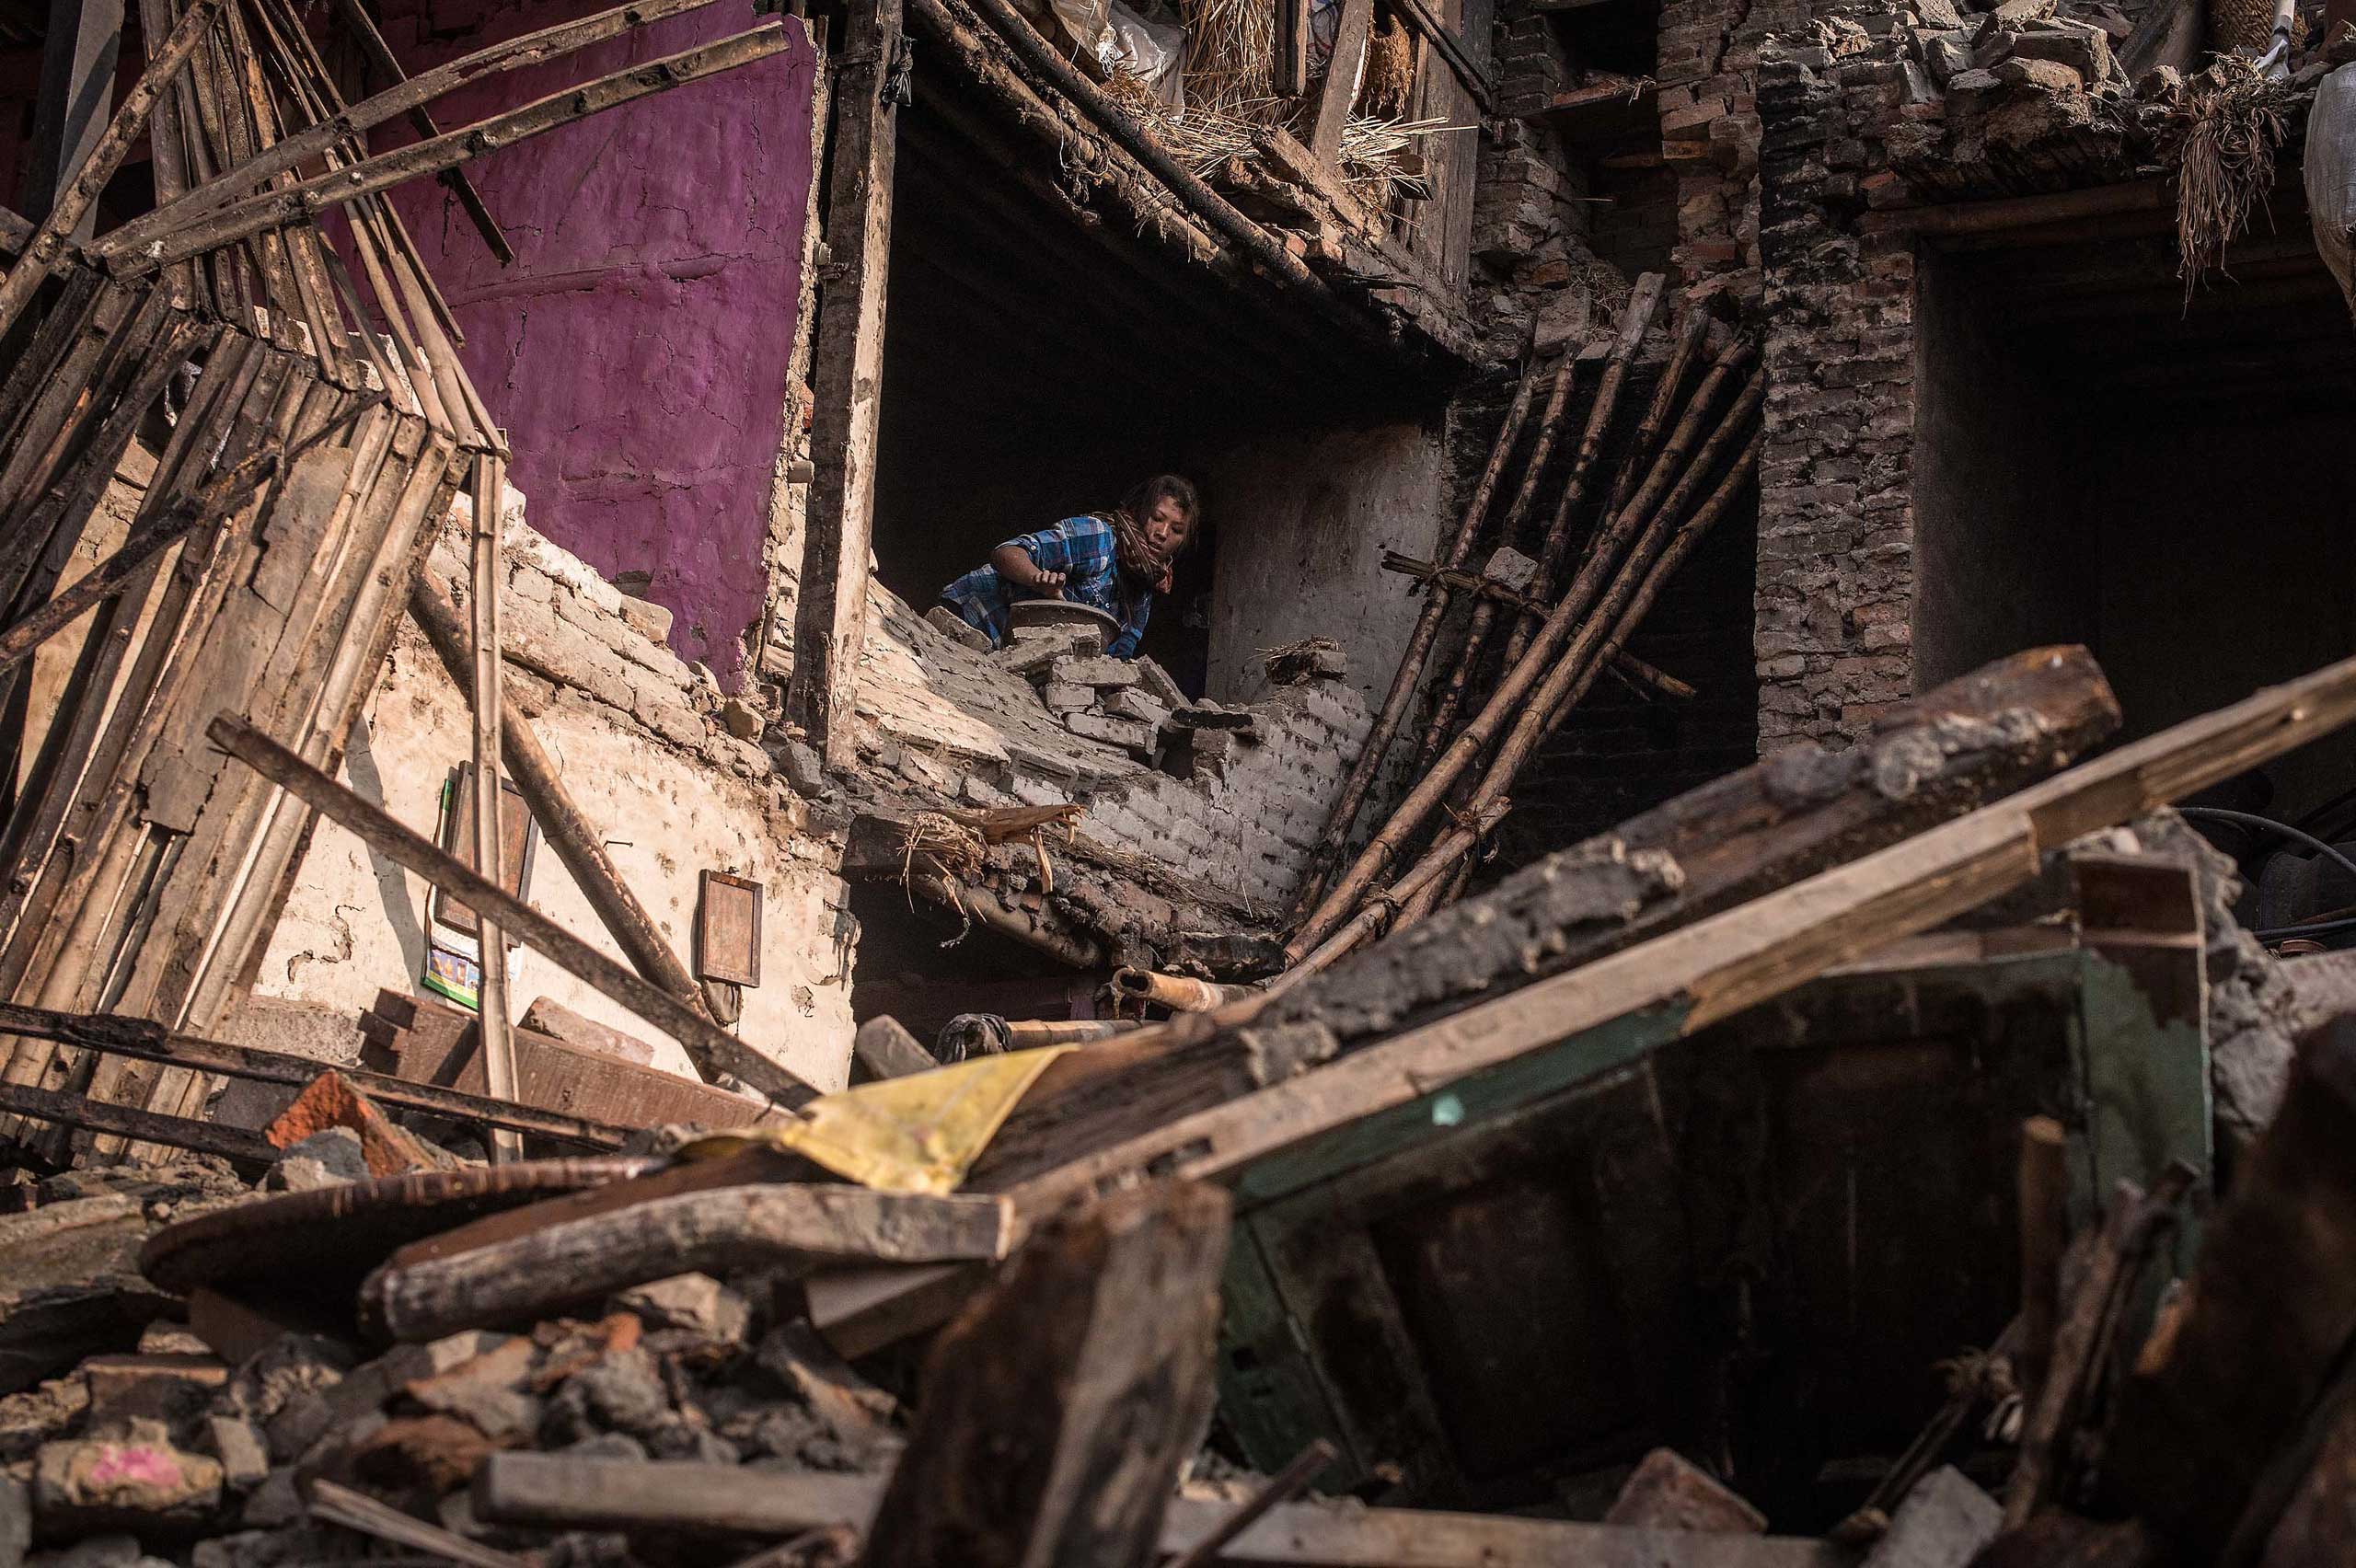 A victim of the earthquake searches for her belongings among debris of her house on in Bhaktapur, Nepal on April 29, 2015. (David Ramos—Getty Images)